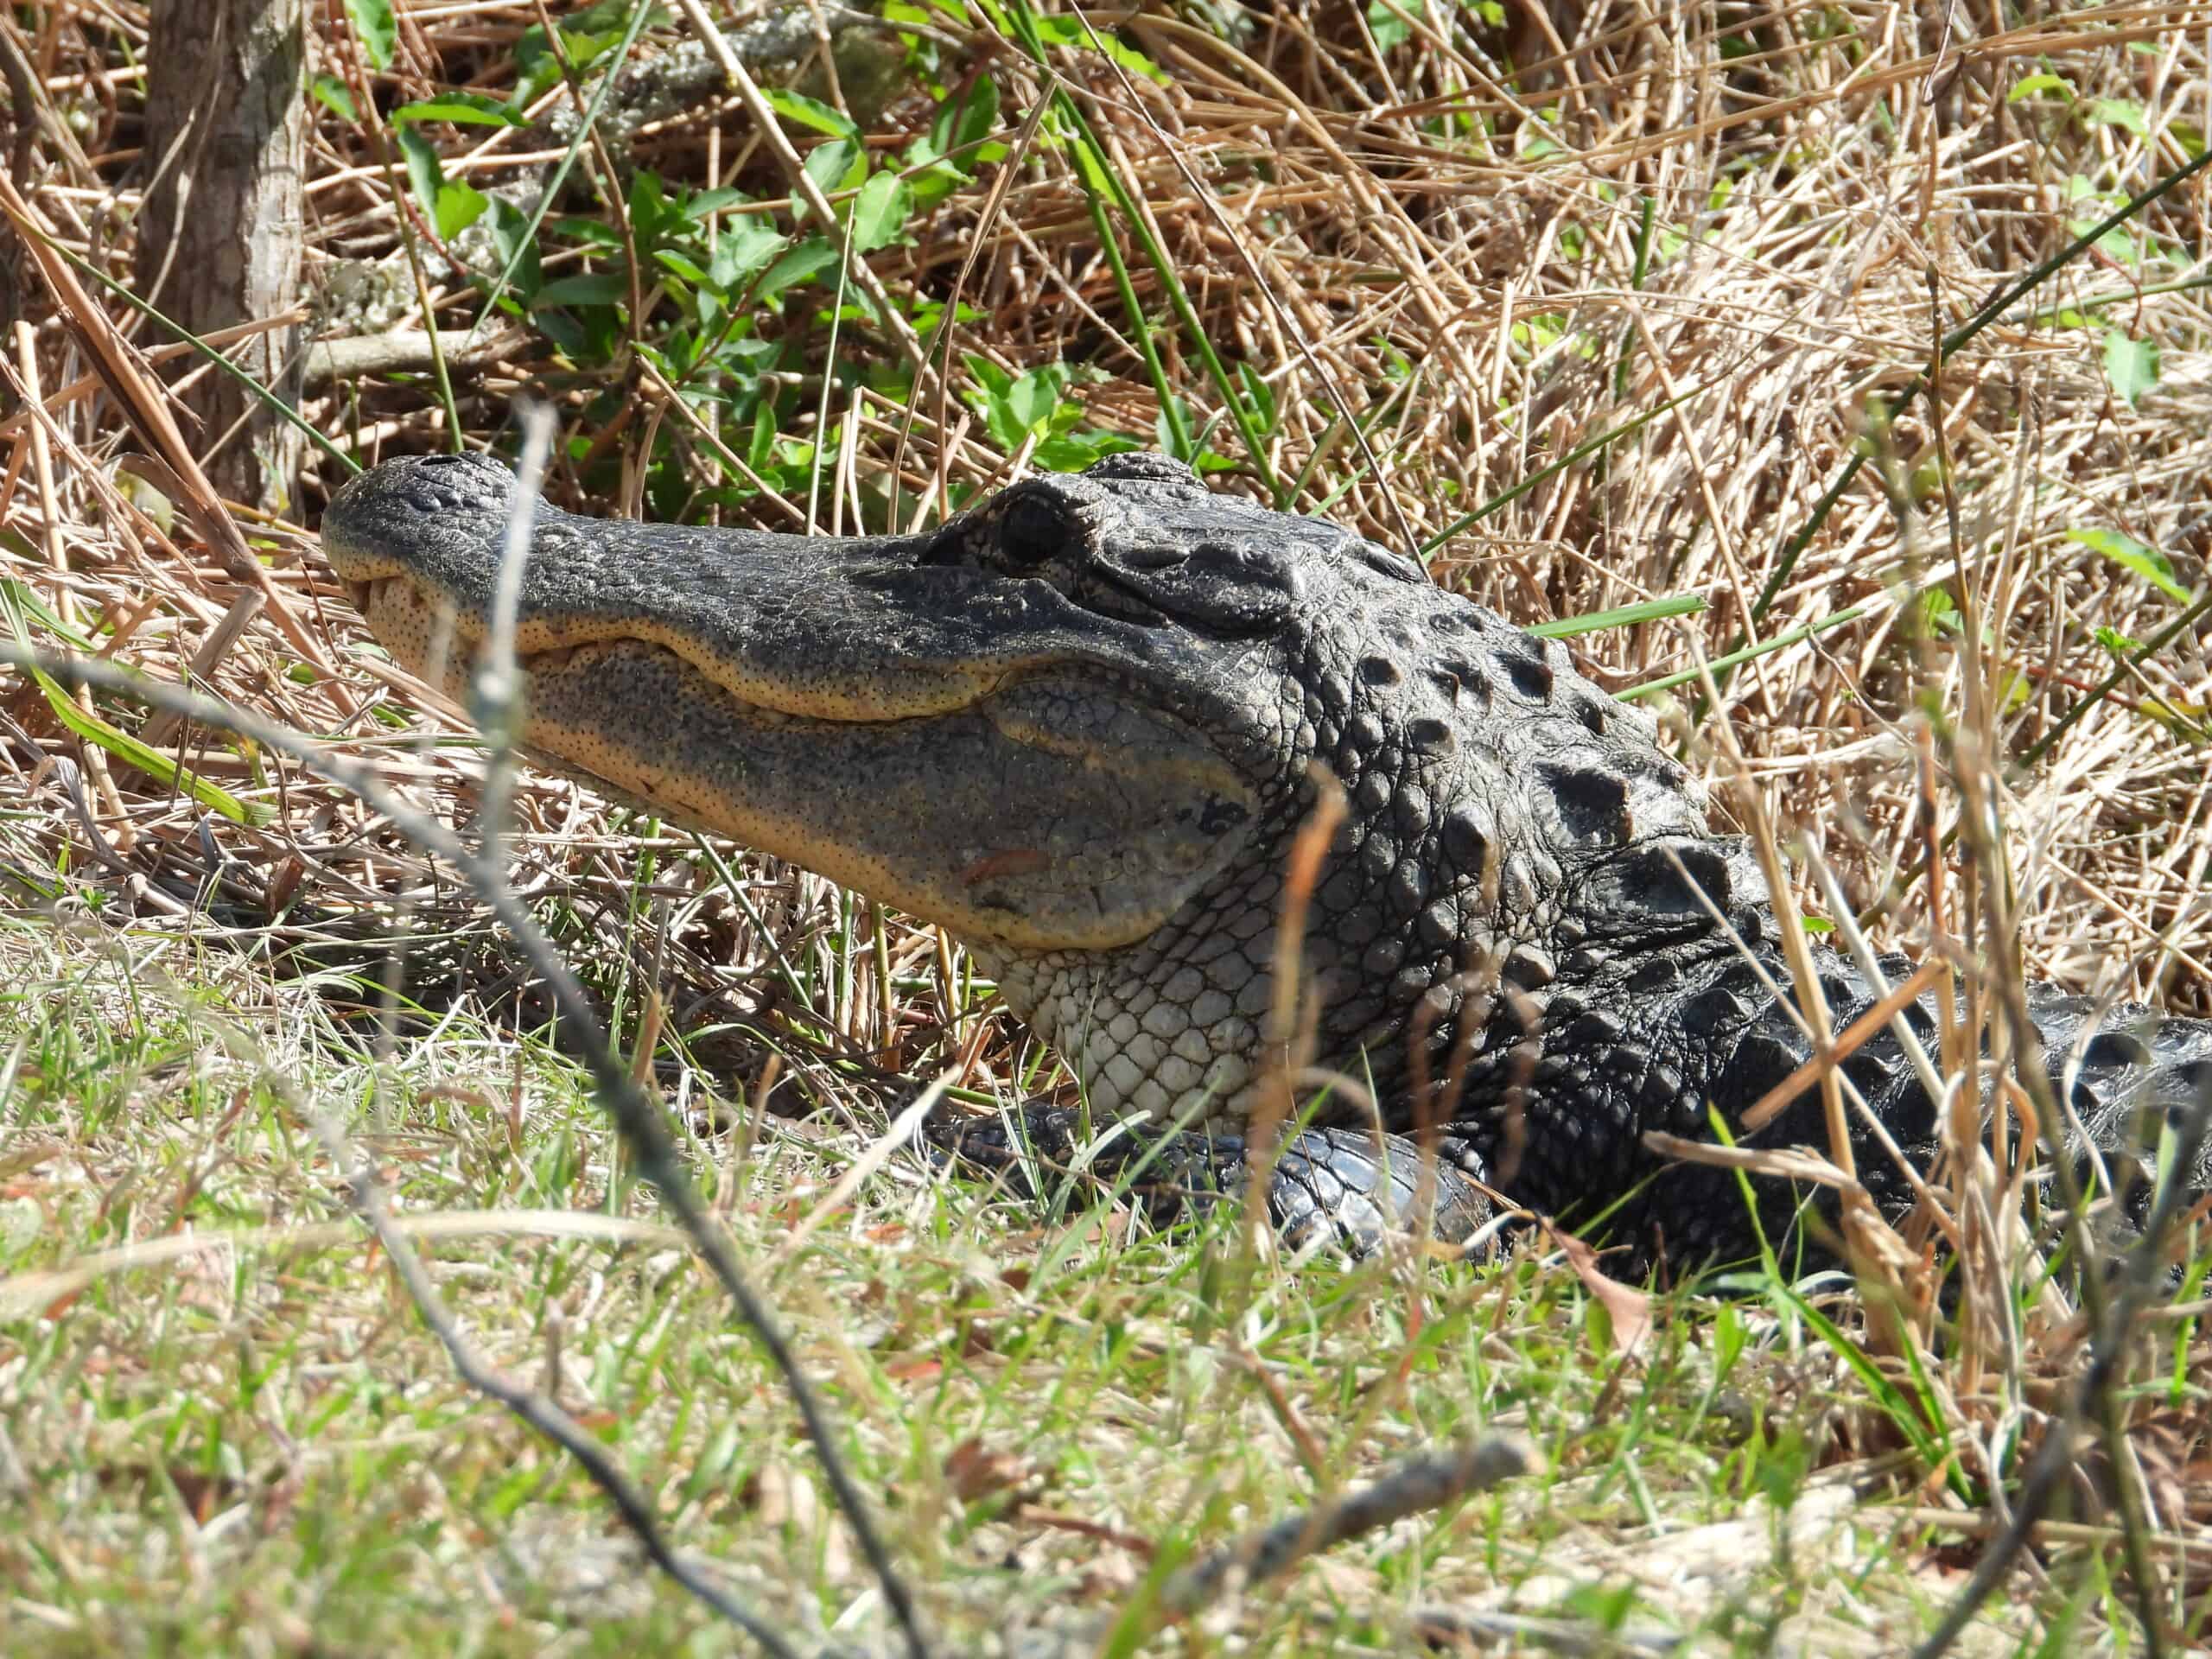 How to See Alligators in the Everglades